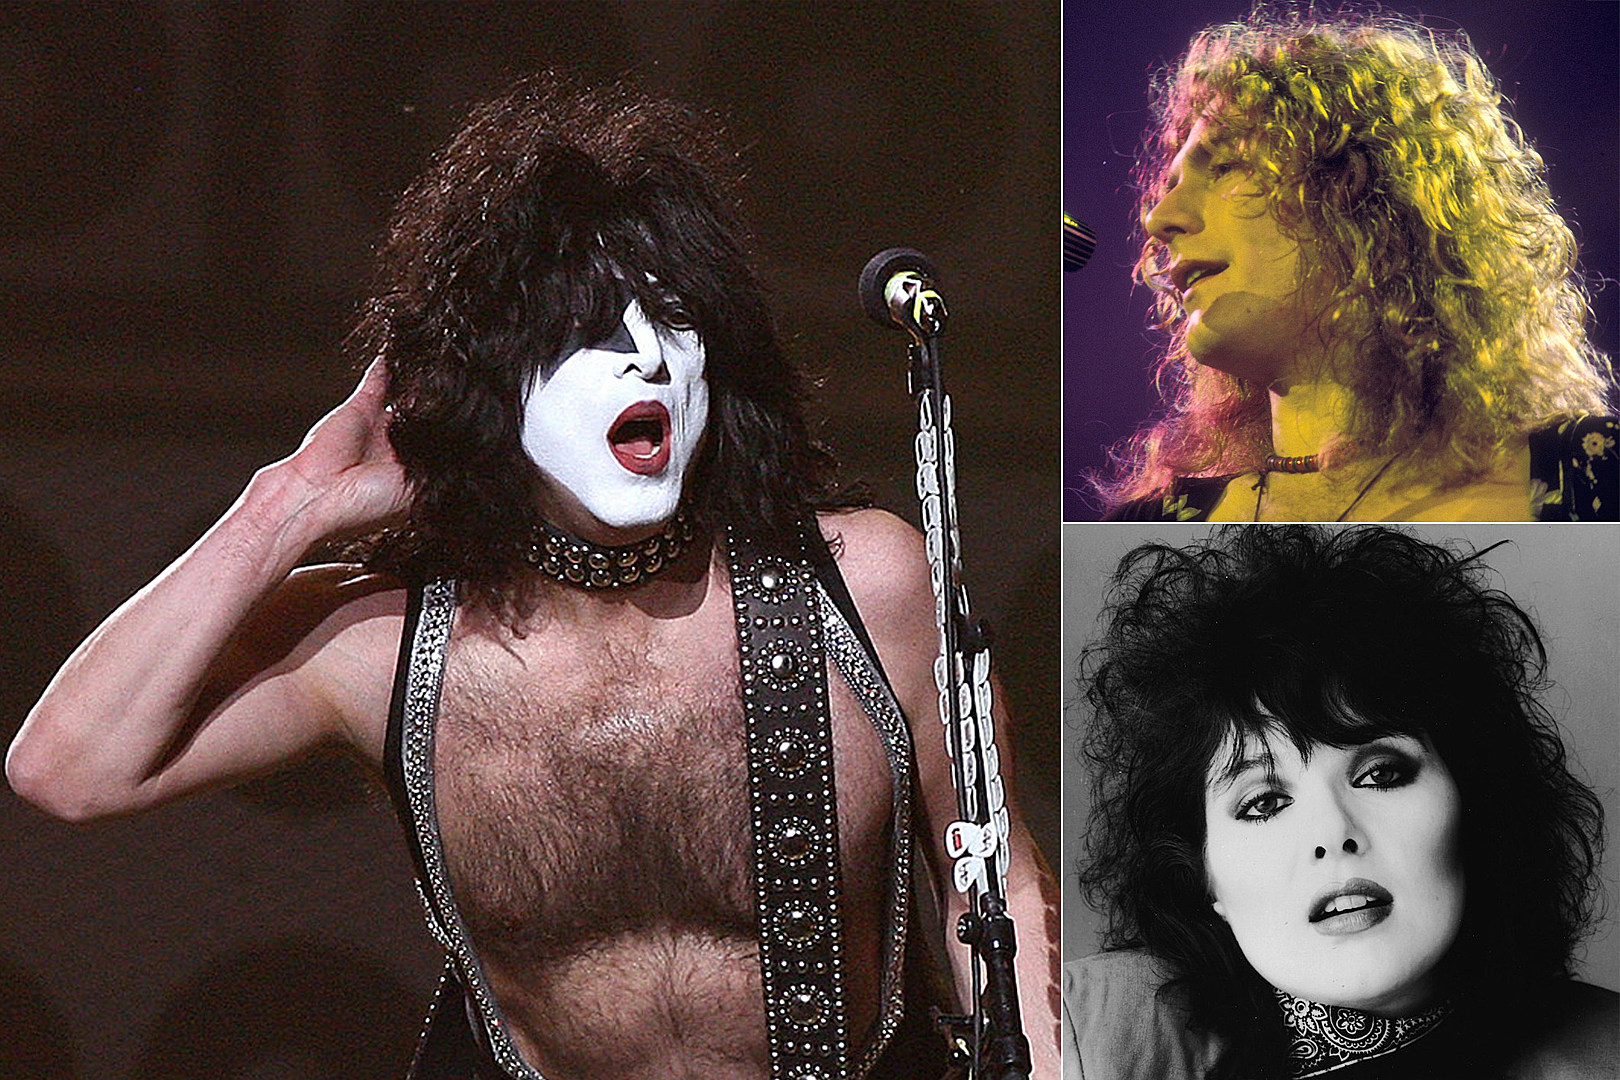 KISS' Paul Stanley Ranks His Top 11 Lead Singers of All Time